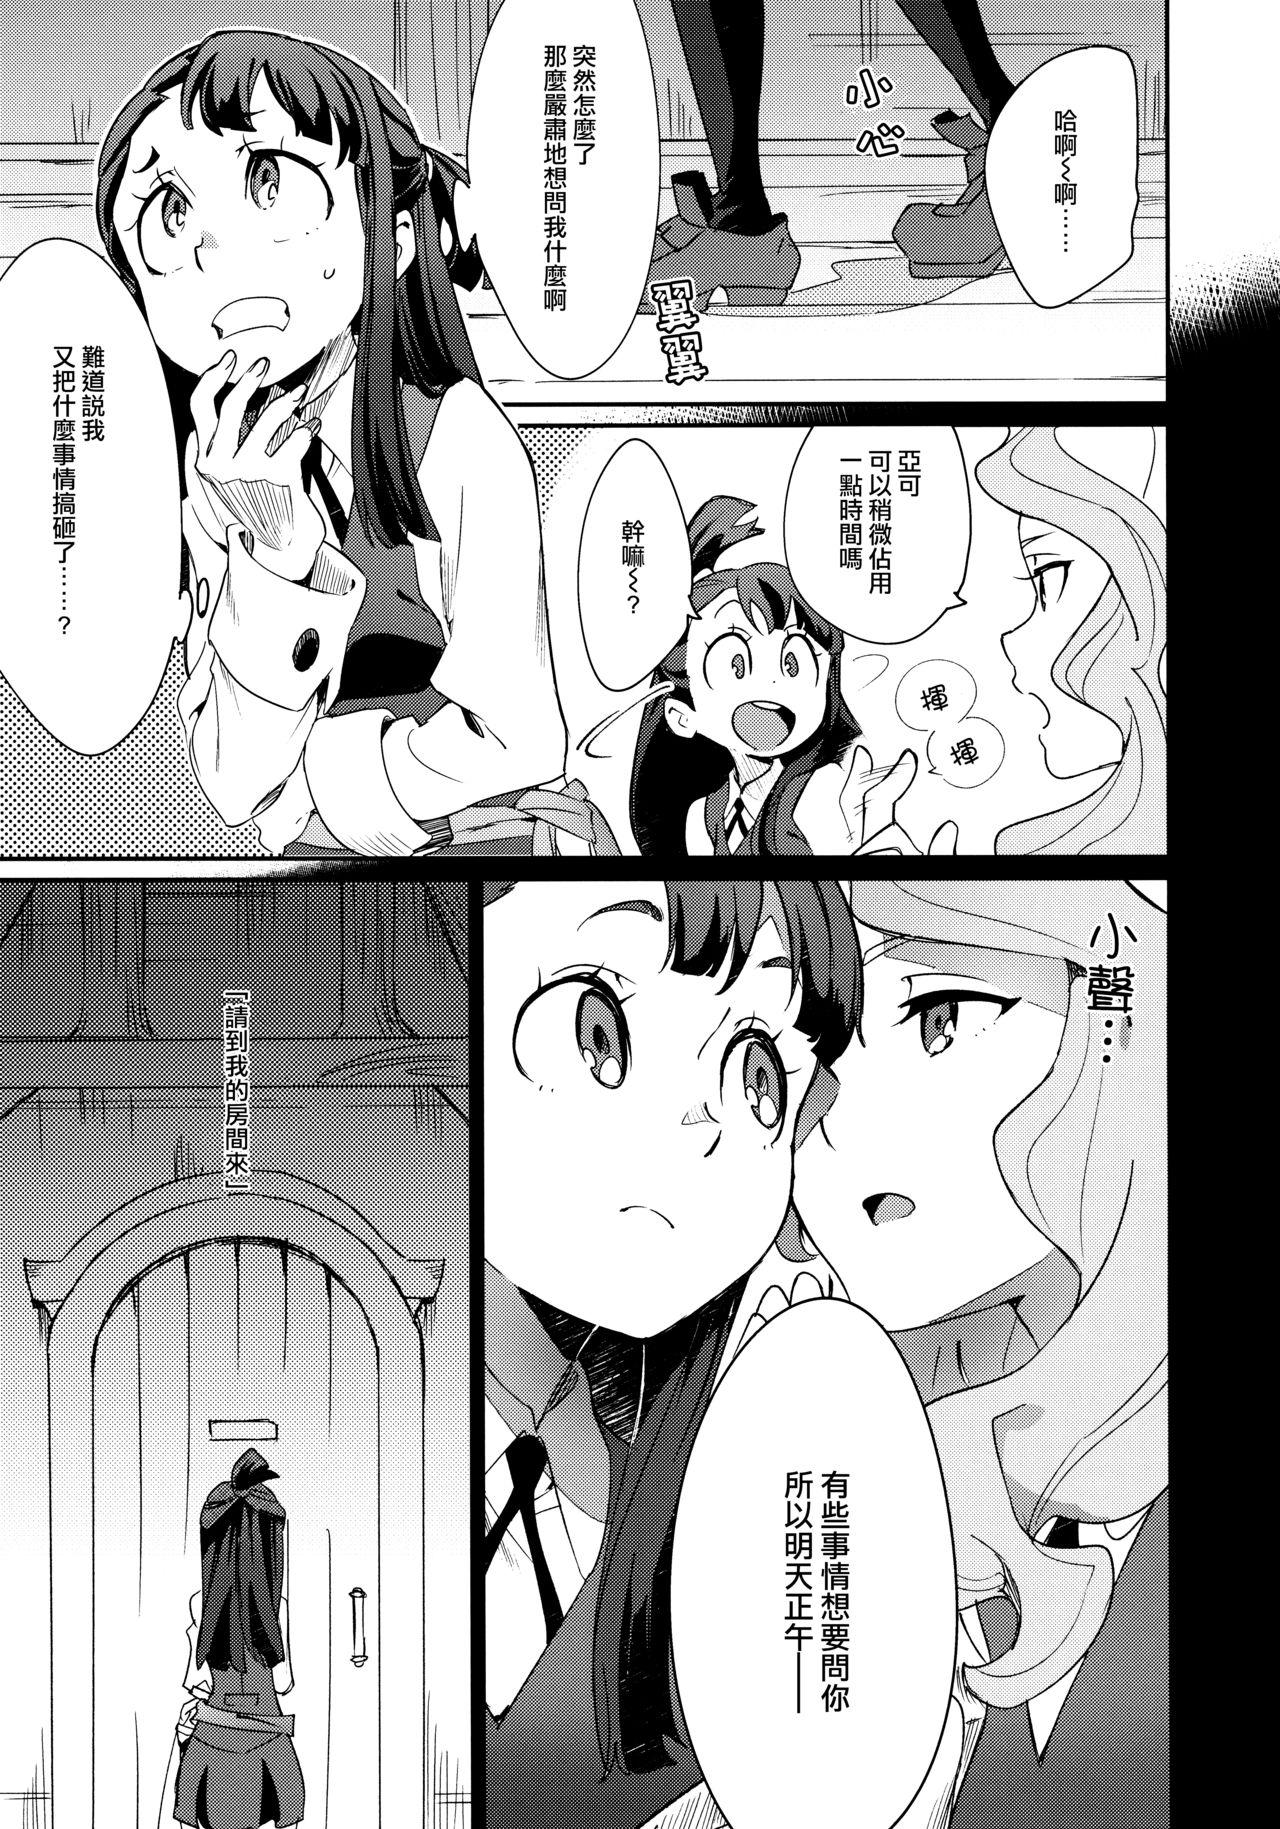 Time xxx - Little witch academia Sharing - Page 3